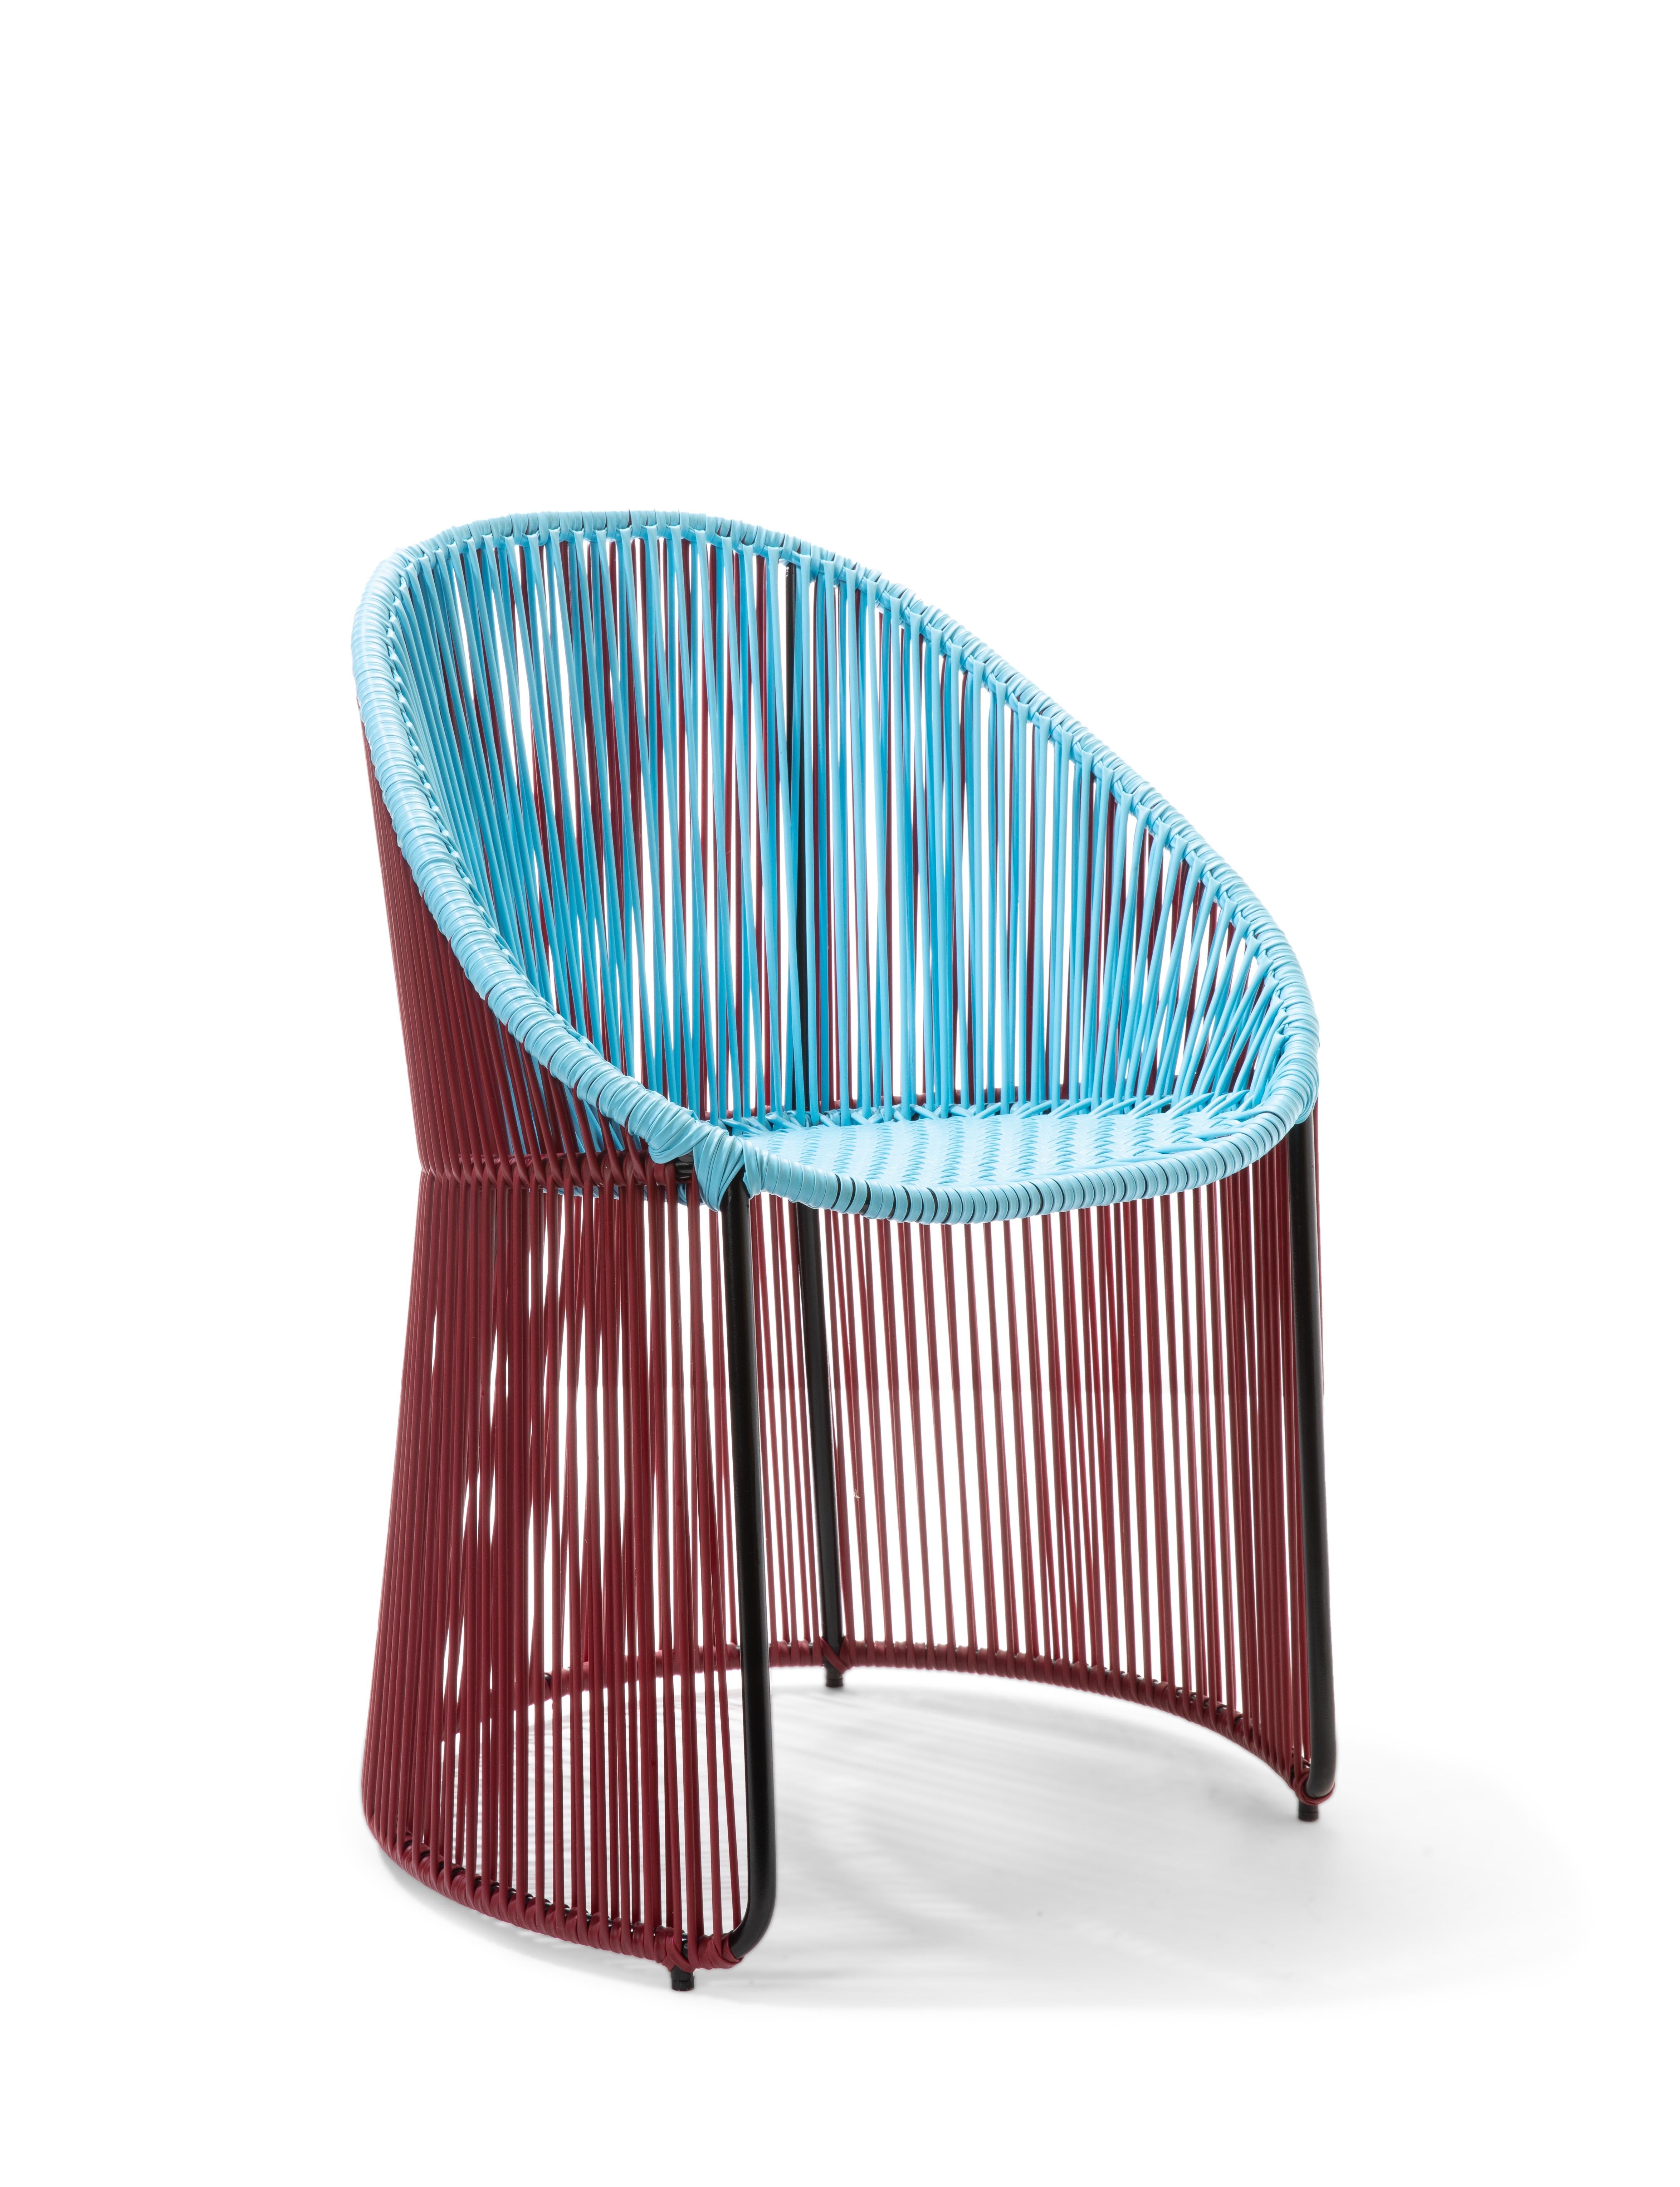 Set of 2 blue pastel/purple cartagenas dining chair by Sebastian Herkner
Materials: PVC strings. Galvanized and powder-coated tubular steel frame
Technique: made from recycled plastic. Weaved by local craftspeople in Colombia. 
Dimensions: W 60.2